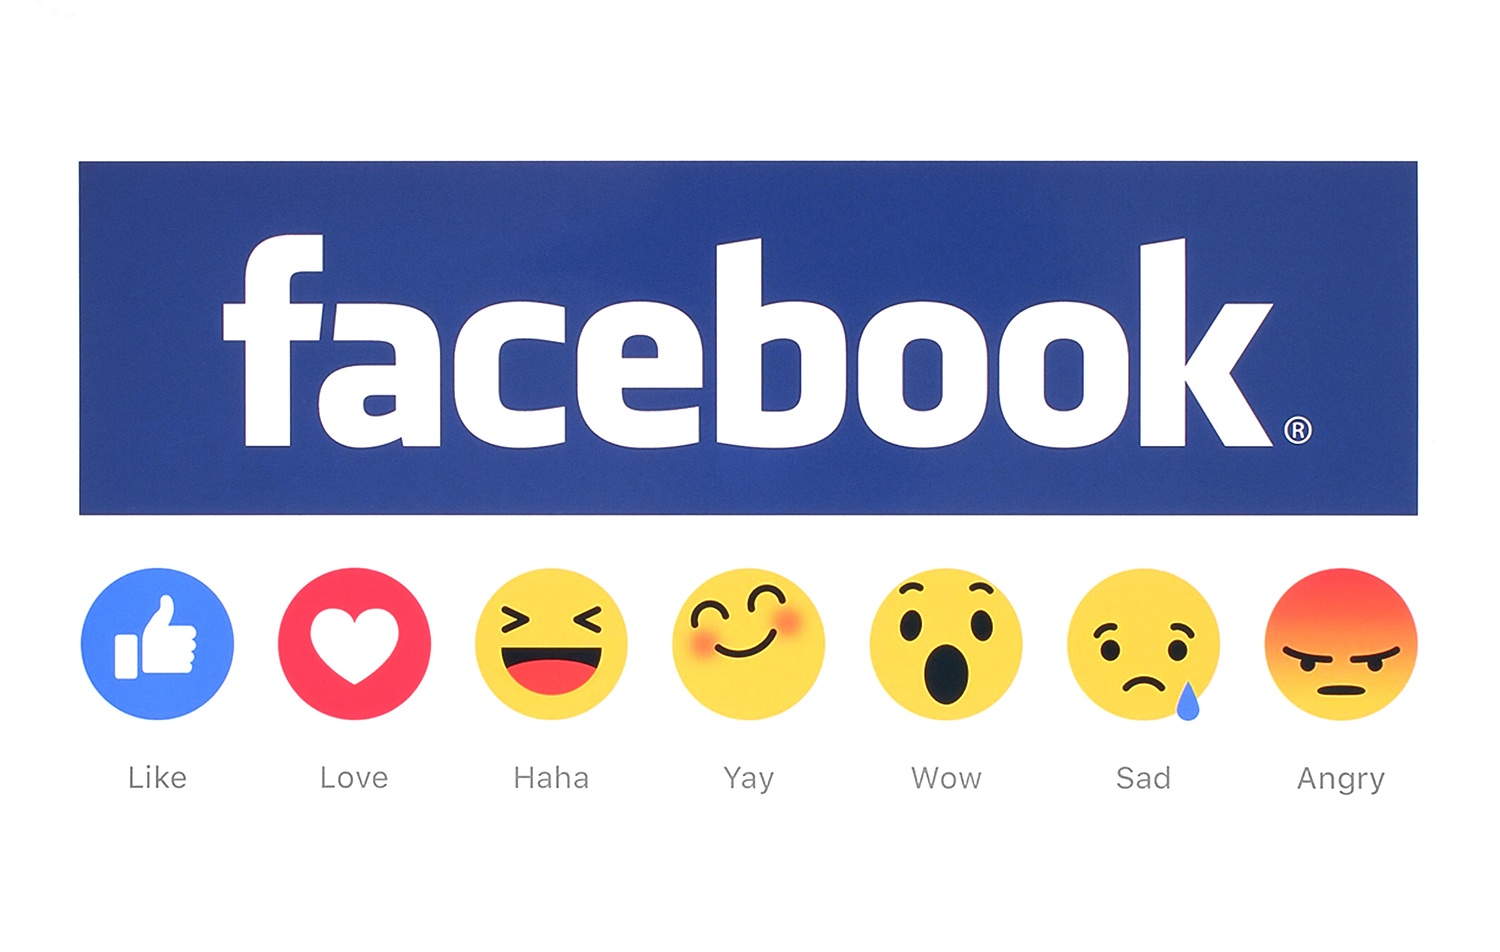 How Marketers Can Create More Impact with Facebook Reactions